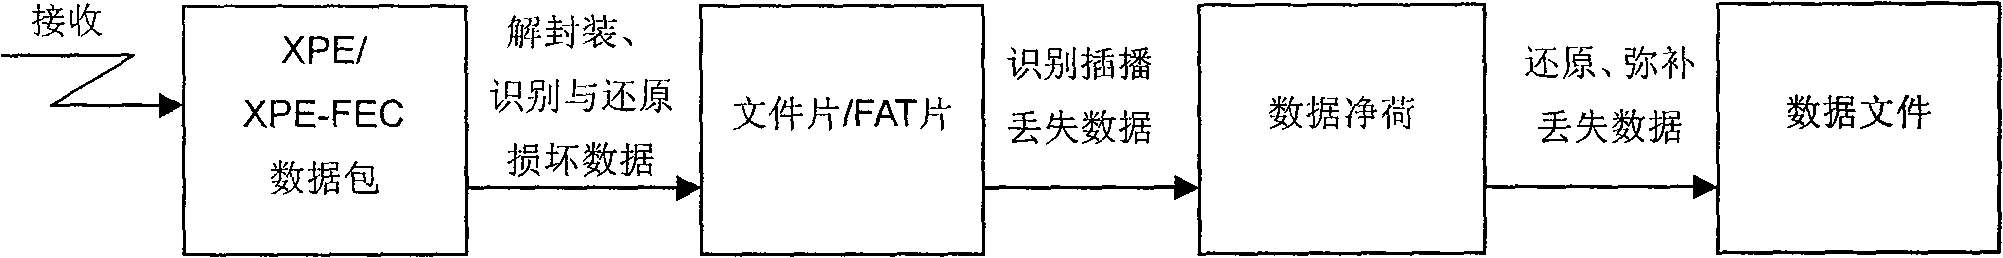 Method of terminal receiving strategy based on CMMB (China Mobile Multimedia Broadcasting) data broadcasting channel